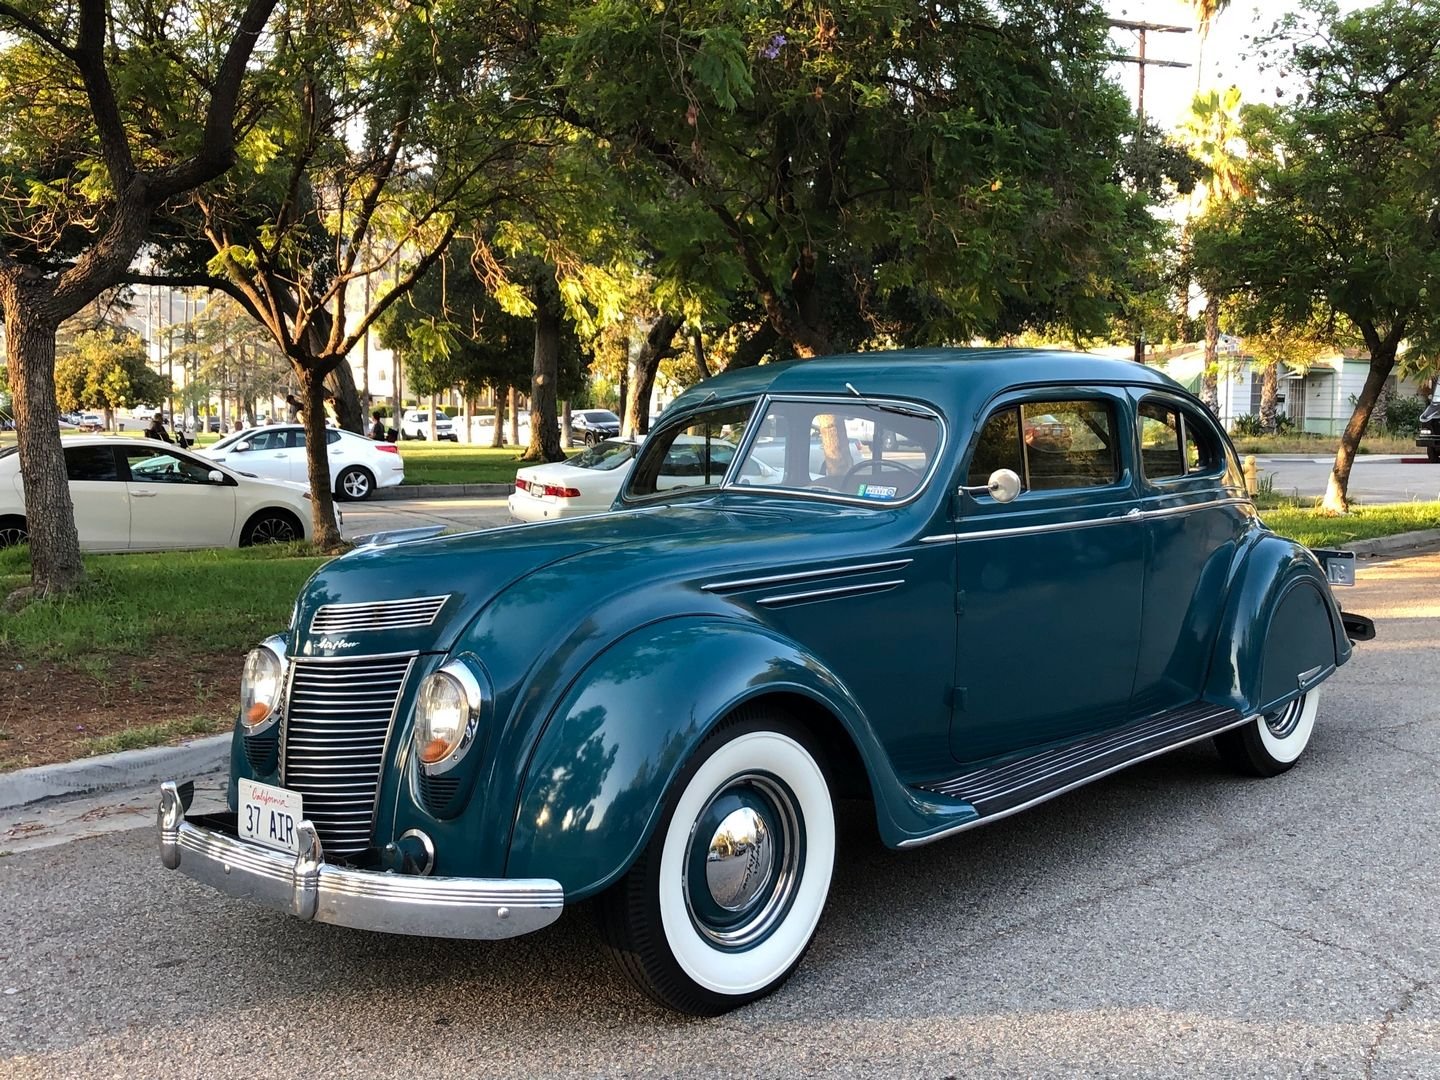 1937 Chrysler Airflow Coupe